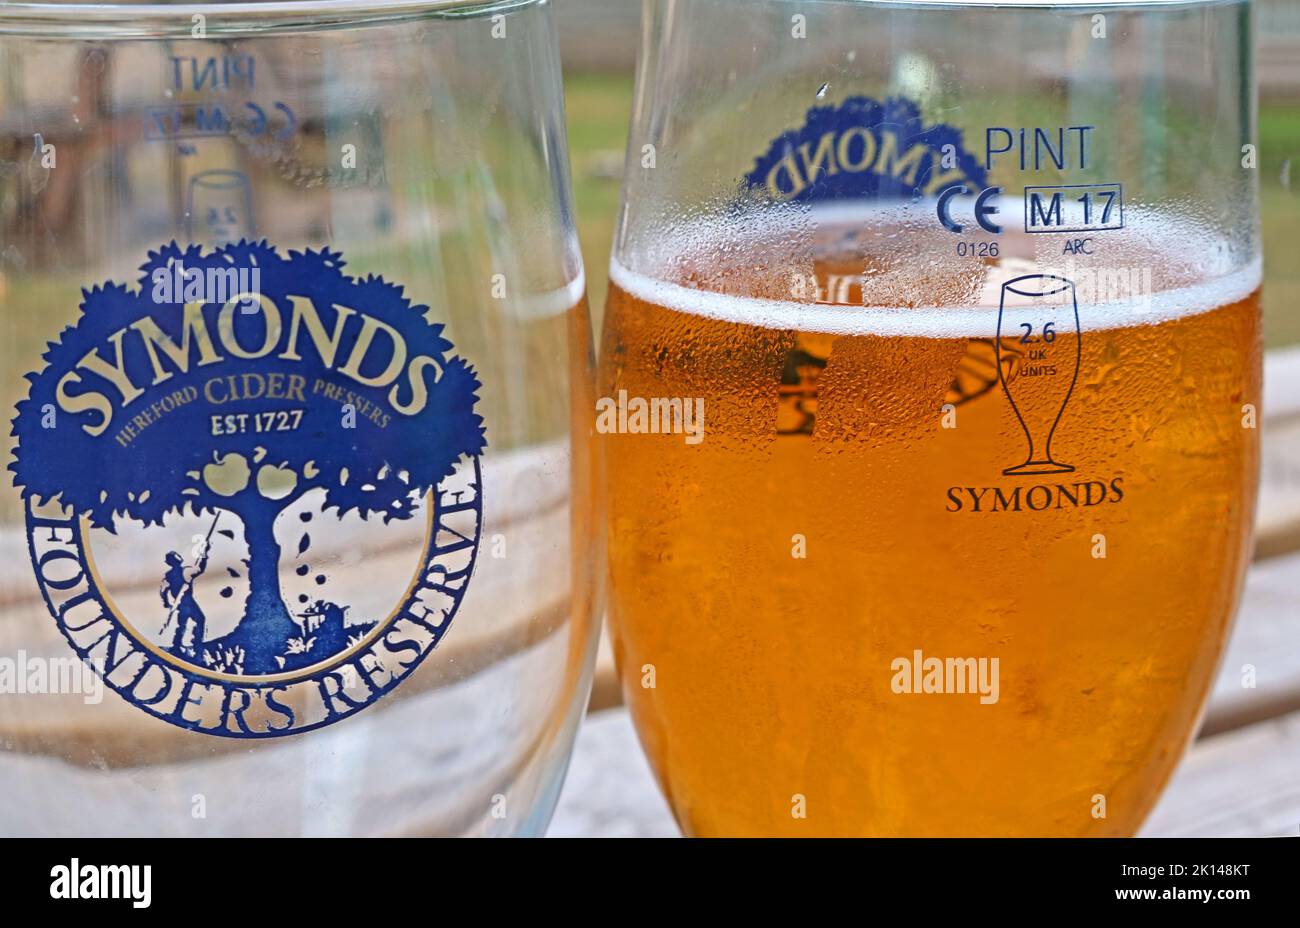 Symonds Hereford Cider, Founders Reserve pint glasses, England, UK Stock Photo